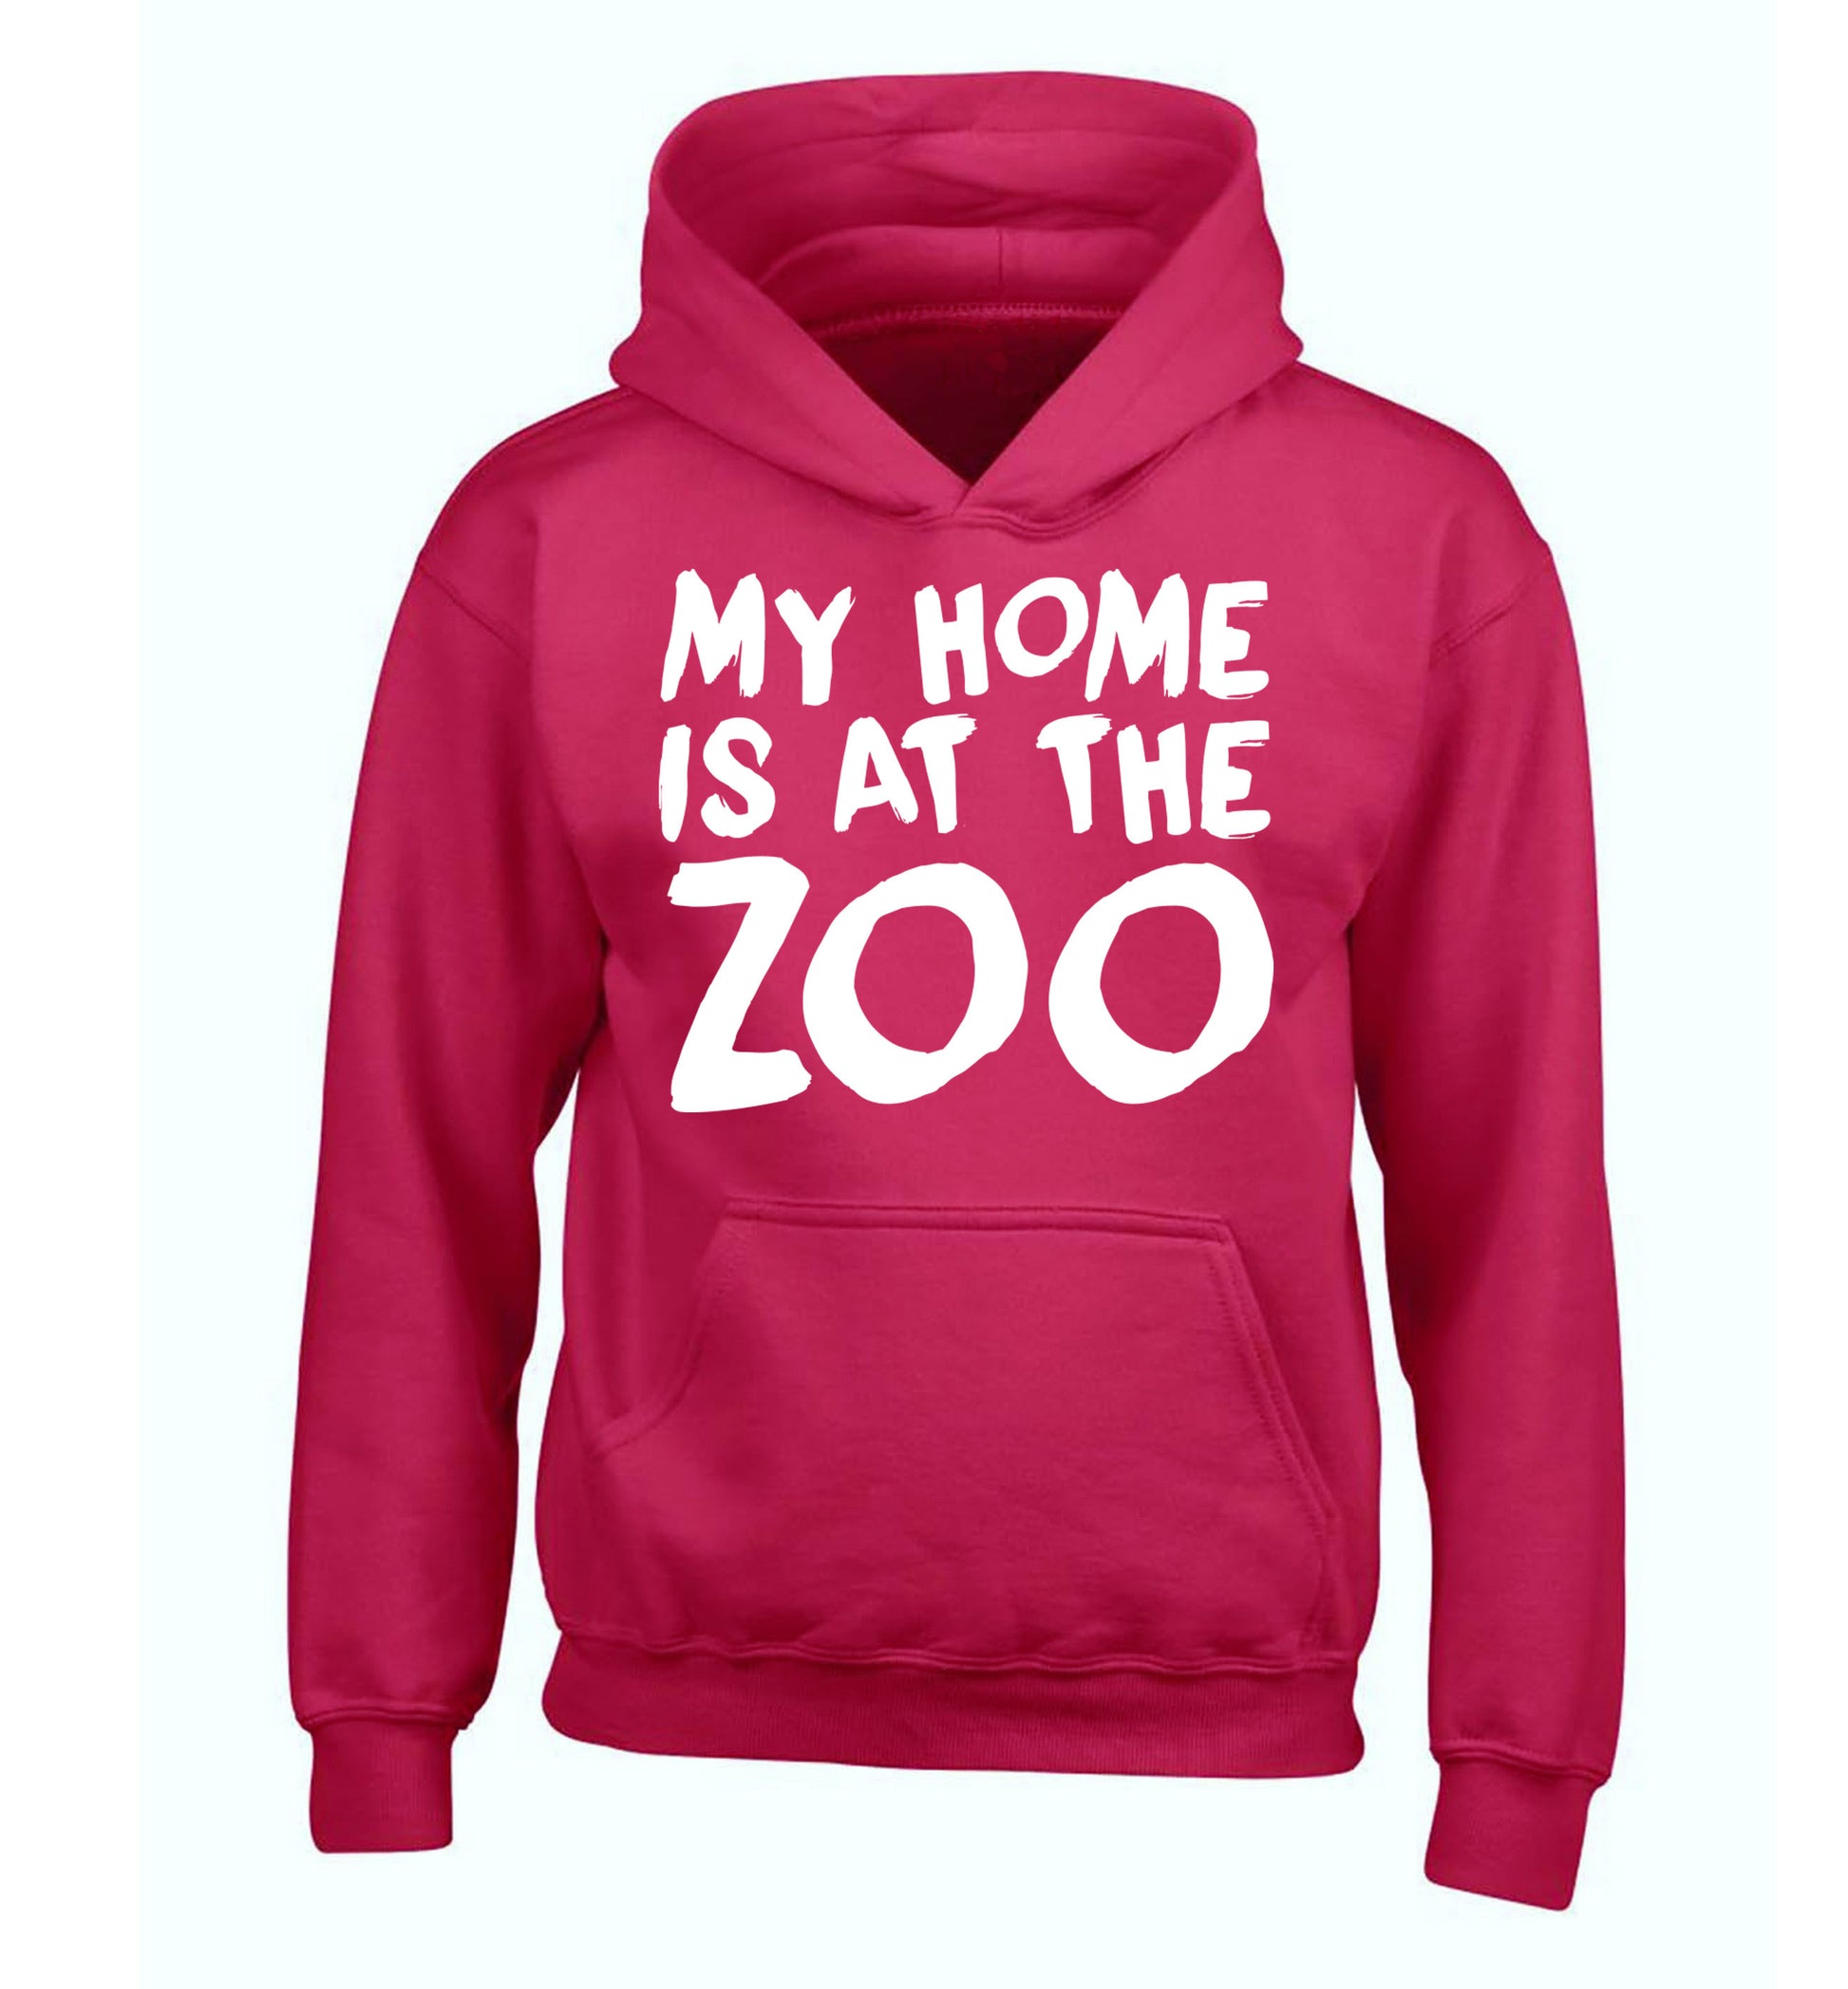 My home is at the zoo children's pink hoodie 12-14 Years